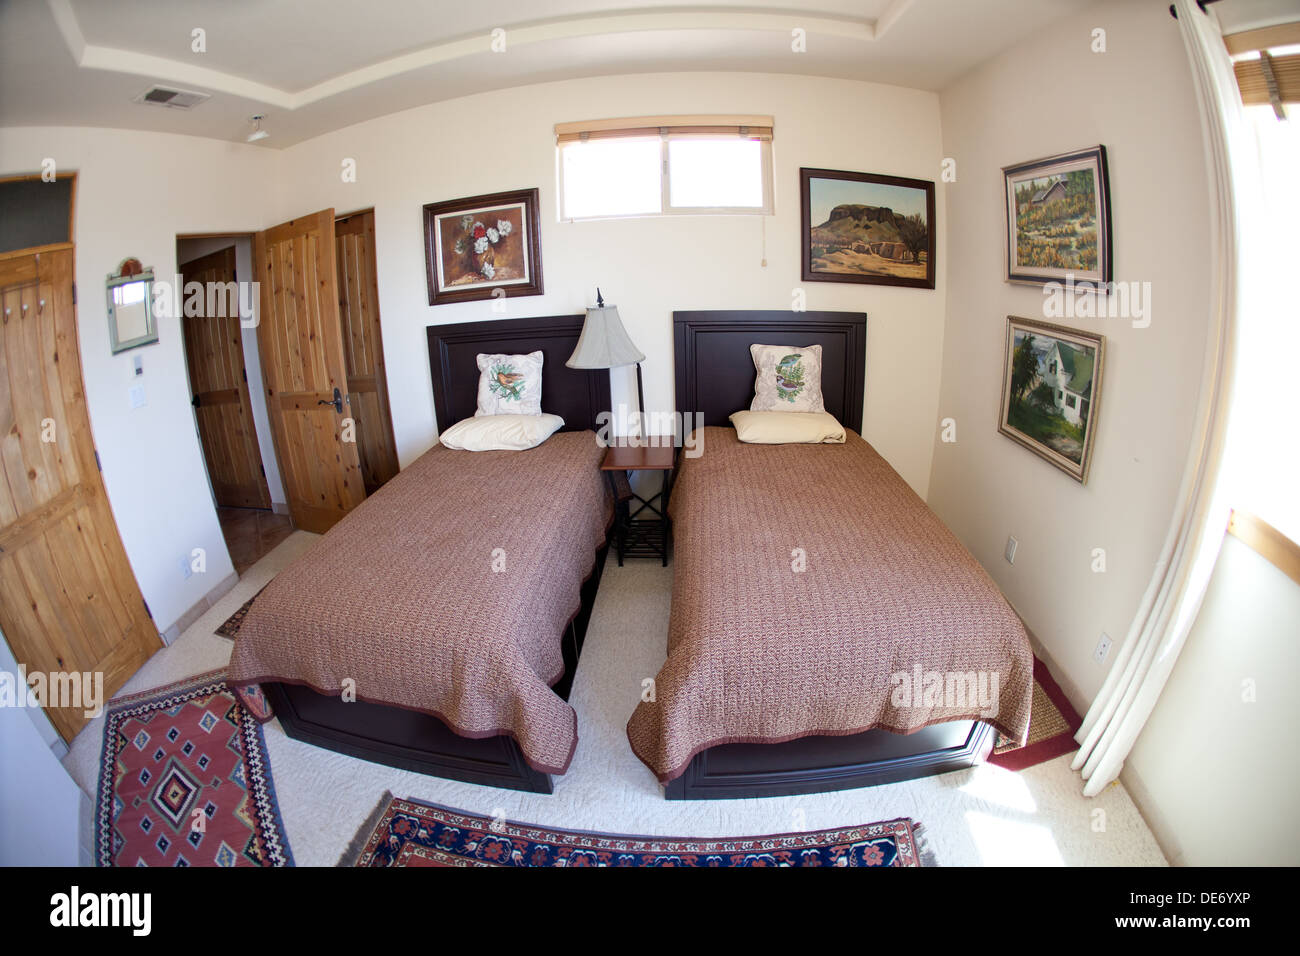 Bedroom with art hanging on the walls and two beds.  Southwestern USA home. Stock Photo